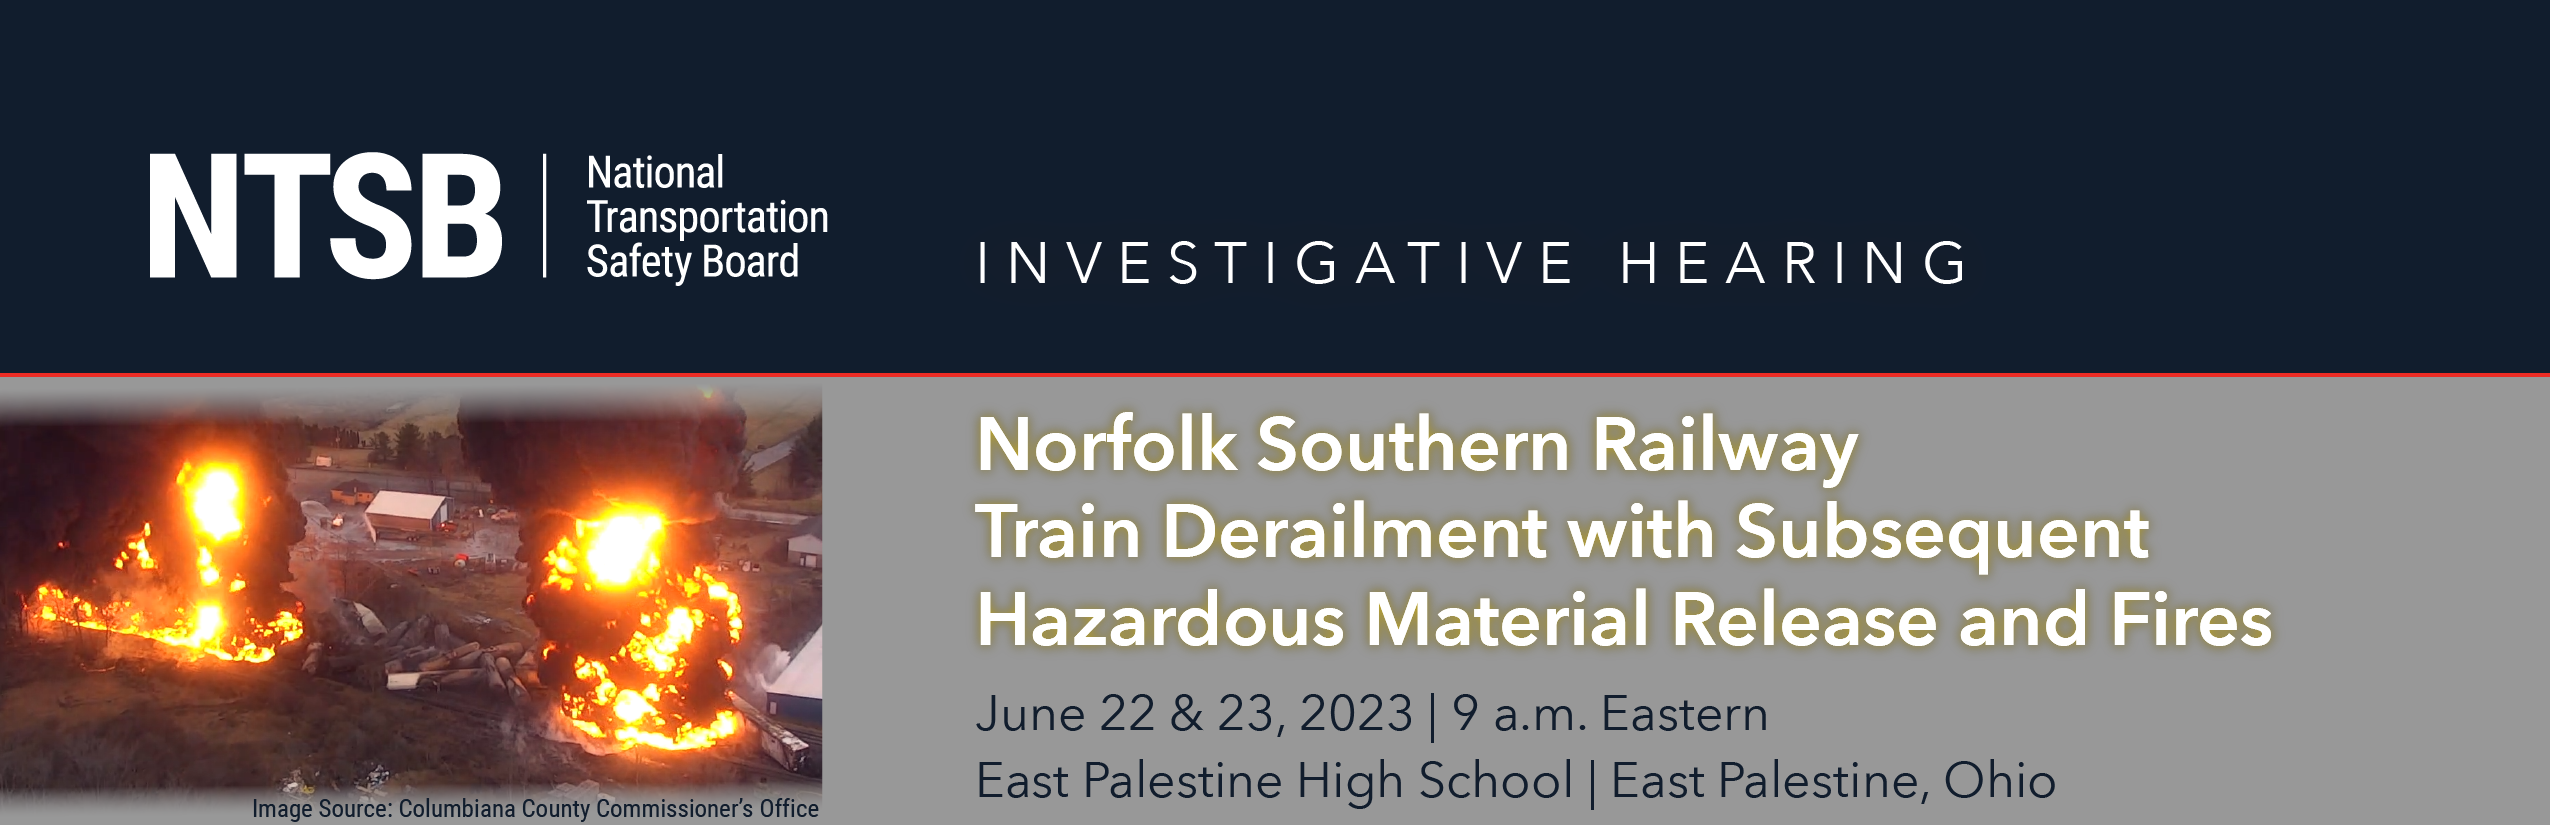 Investigative Hearing:  Norfolk Southern Railway Train Derailment with Subsequent Hazardous Material Release and Fires Flyer